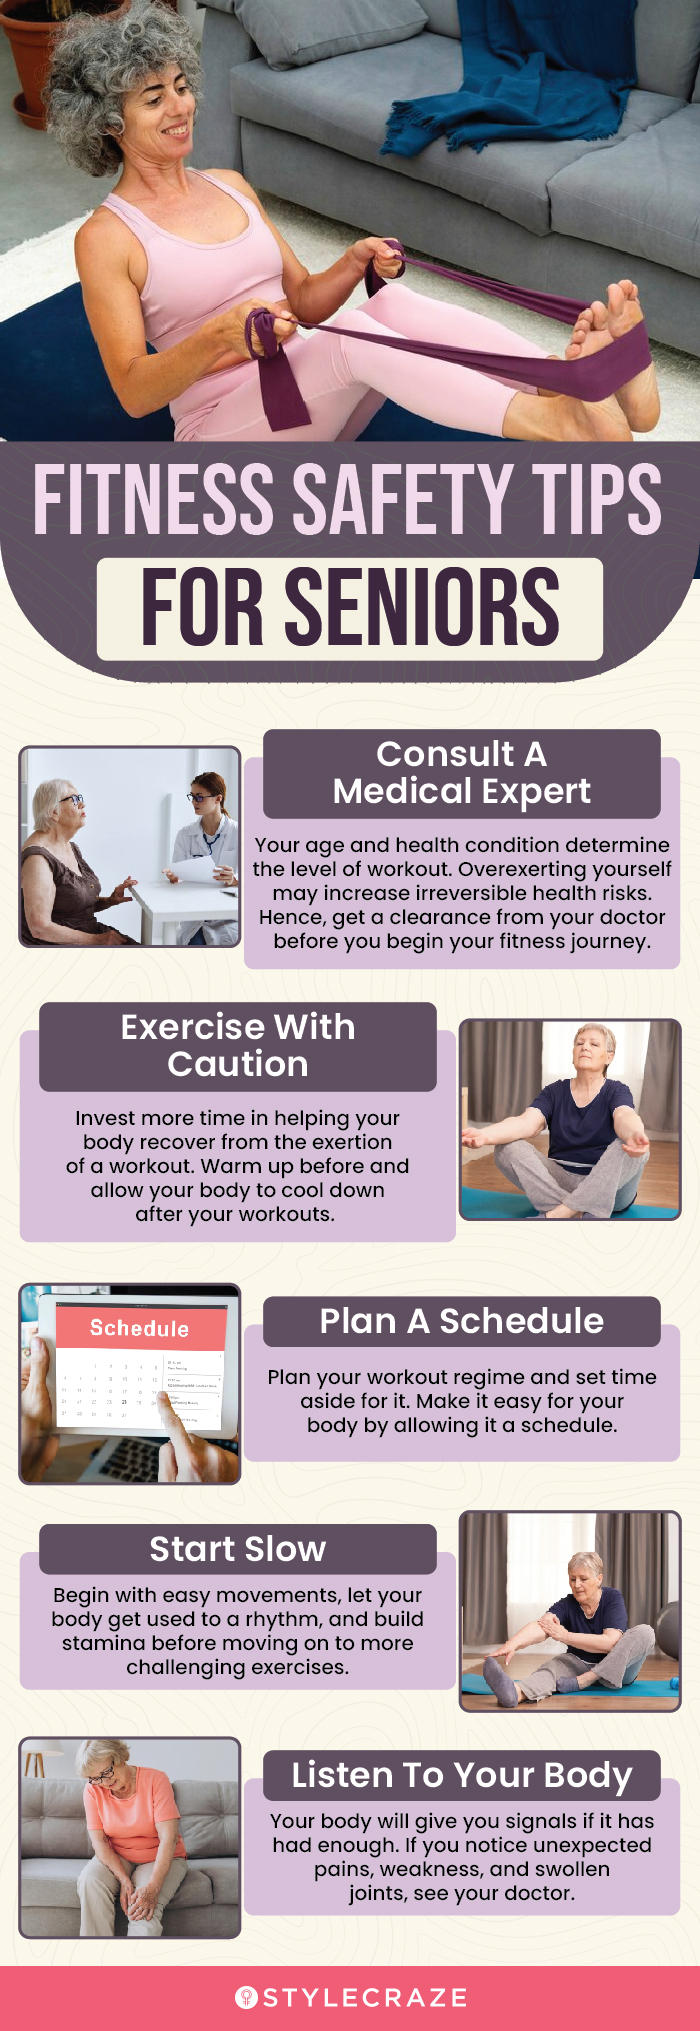 Fitness Safety Tips For Seniors (infographic)